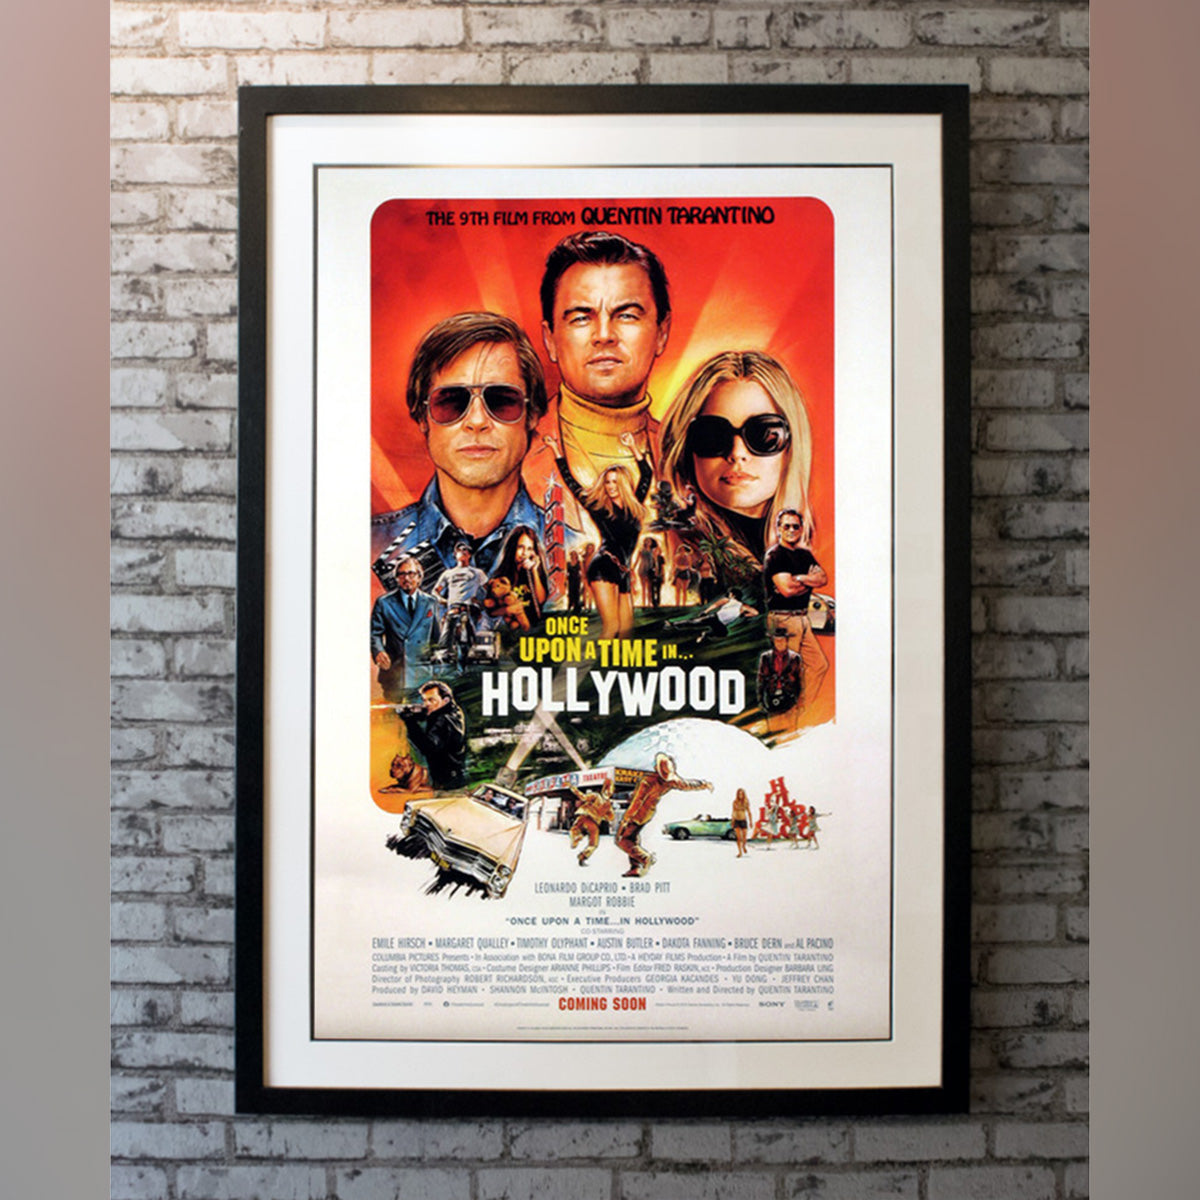 Original Movie Poster of Once Upon A Time In Hollywood (2019)